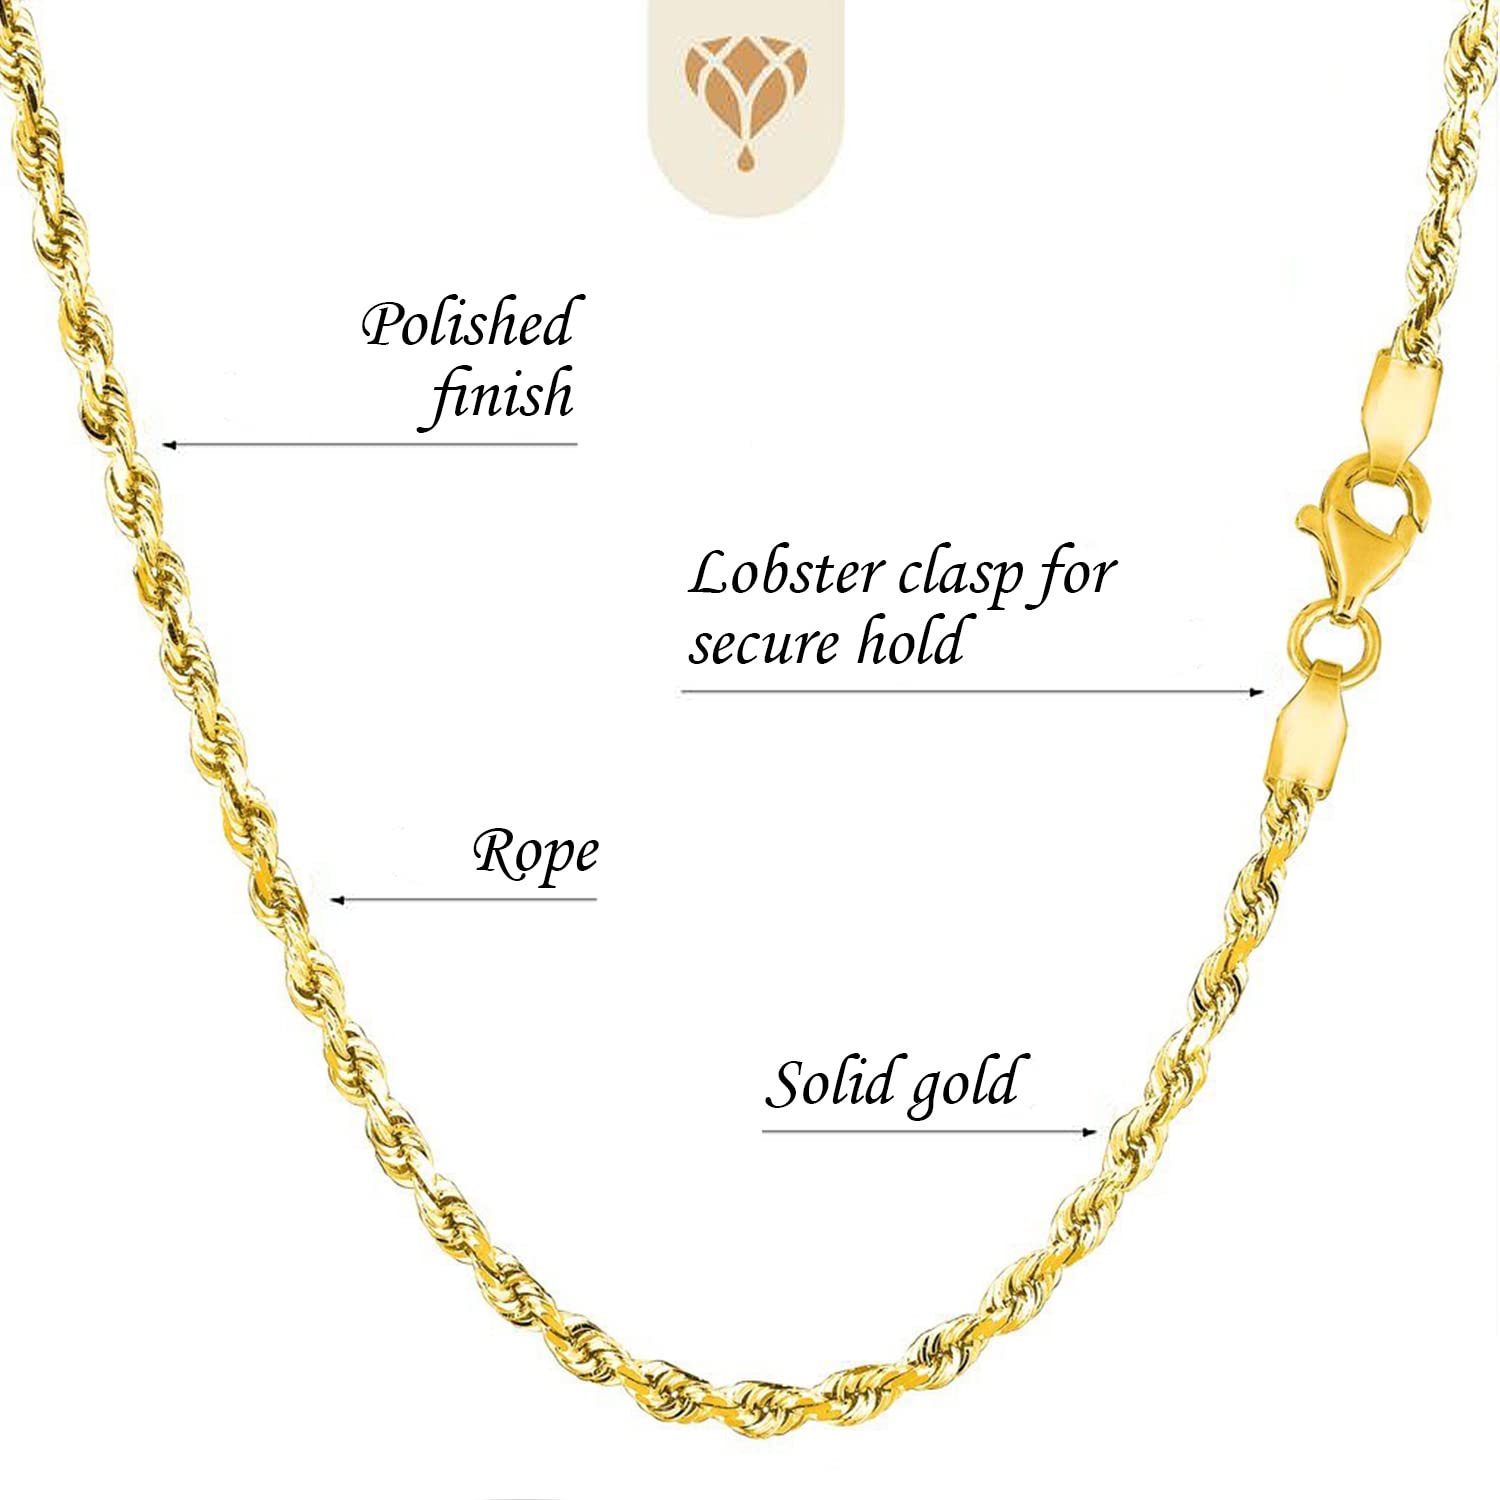 14k SOLID Yellow Gold 3.5mm Shiny Diamond-Cut Royal Solid Rope Chain Necklace for Pendants and Charms with Lobster-Claw Clasp (18